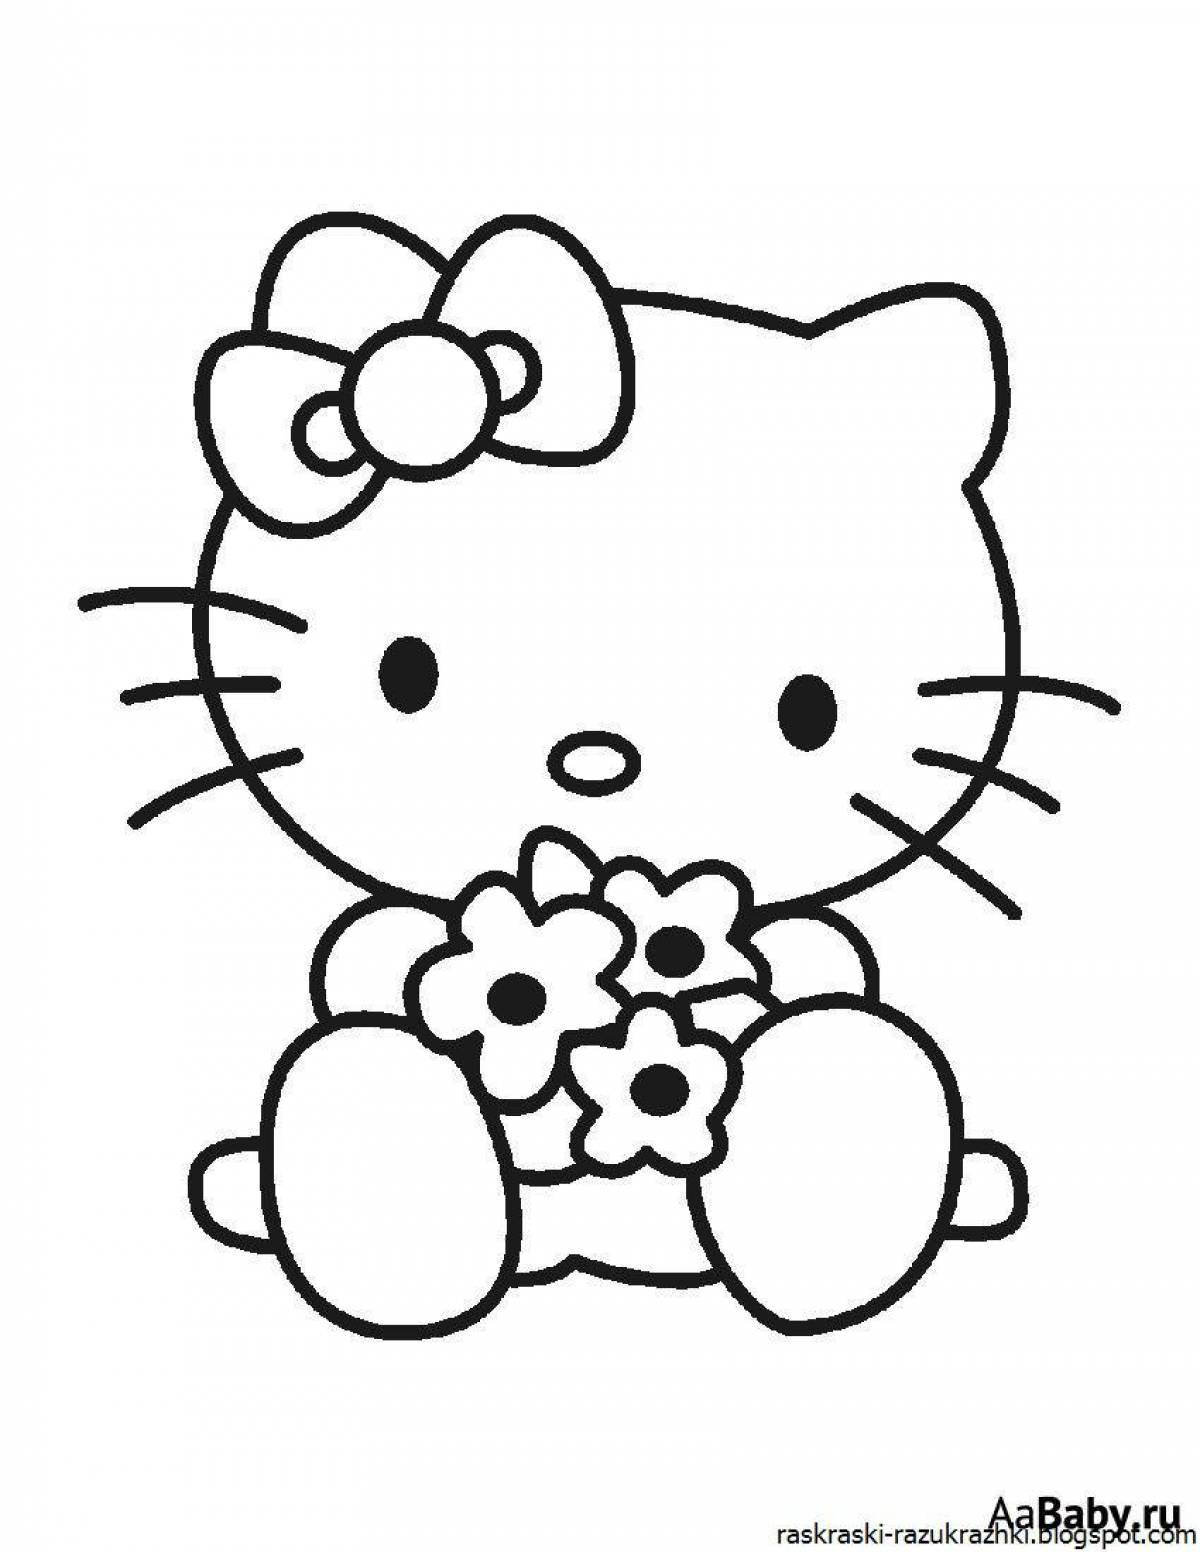 For girls hello kitty #4